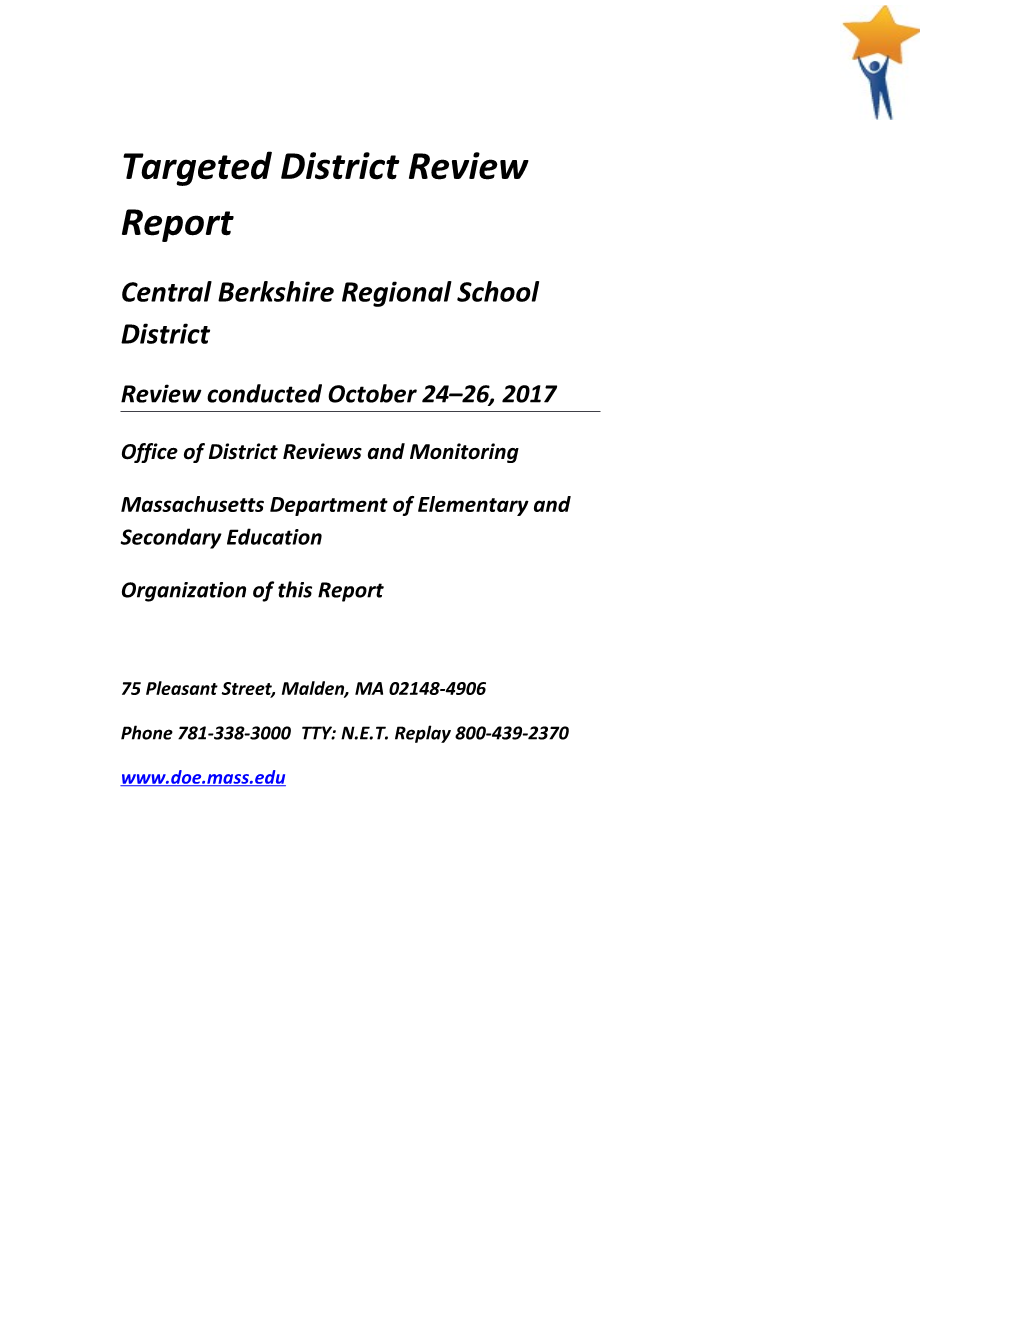 Central Berkshire RSD Targeted District Review Report January 2018